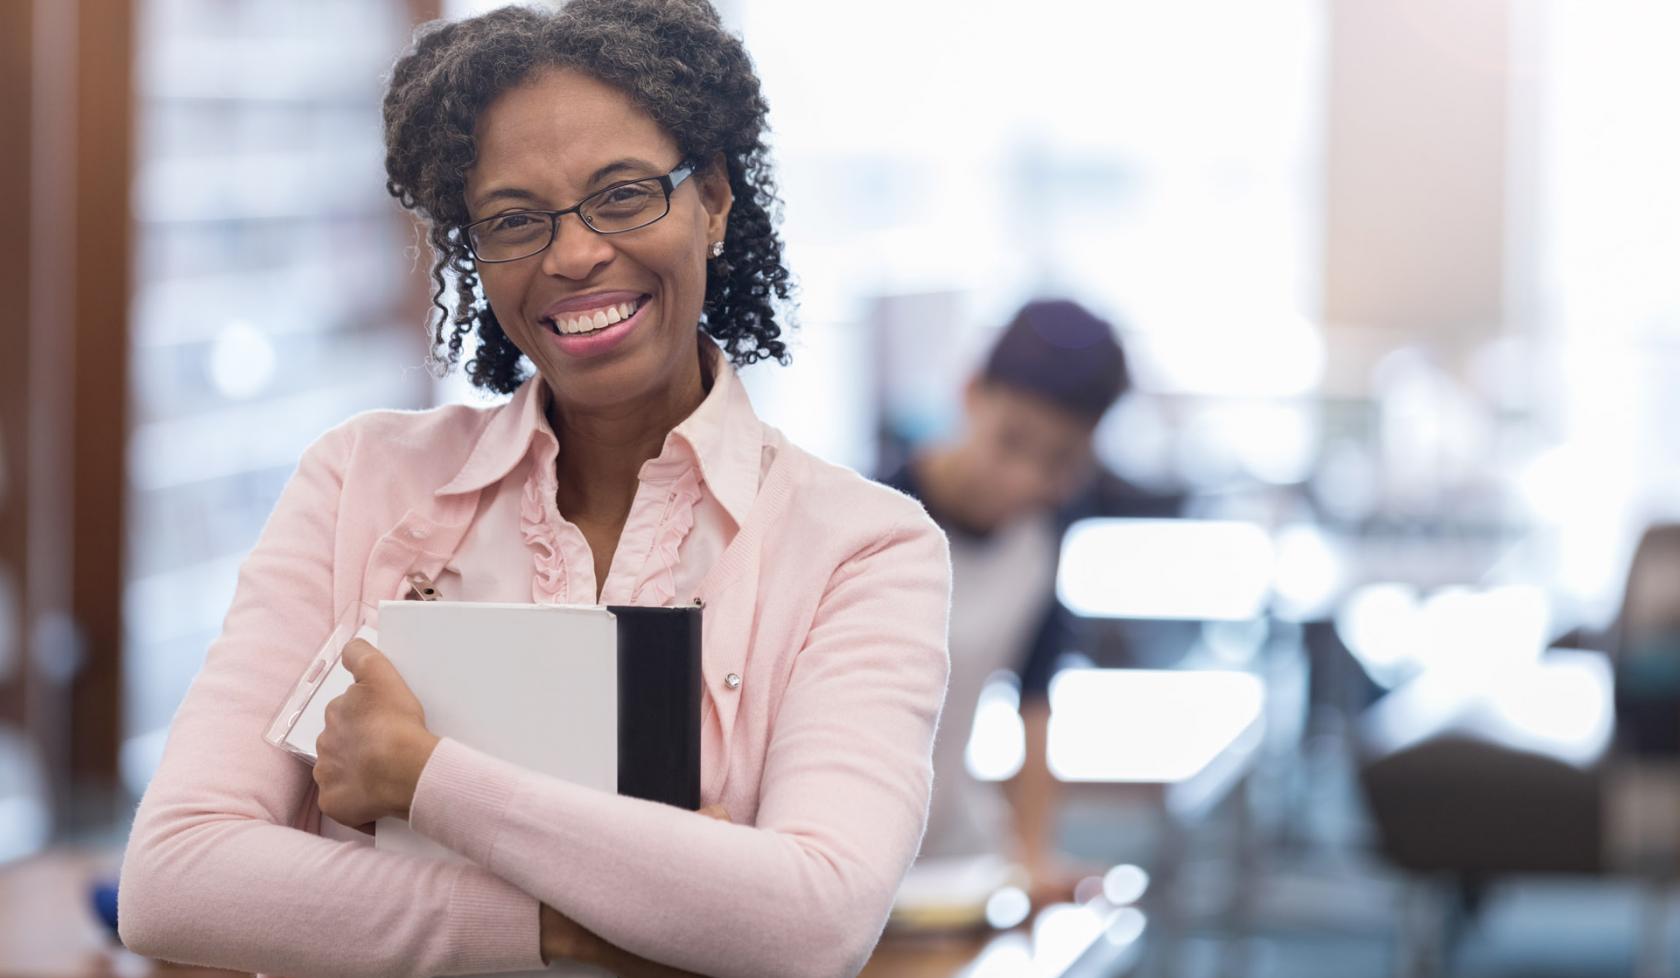 Close-up Black Female Professional Smiling at Camera While Holding Paperwork